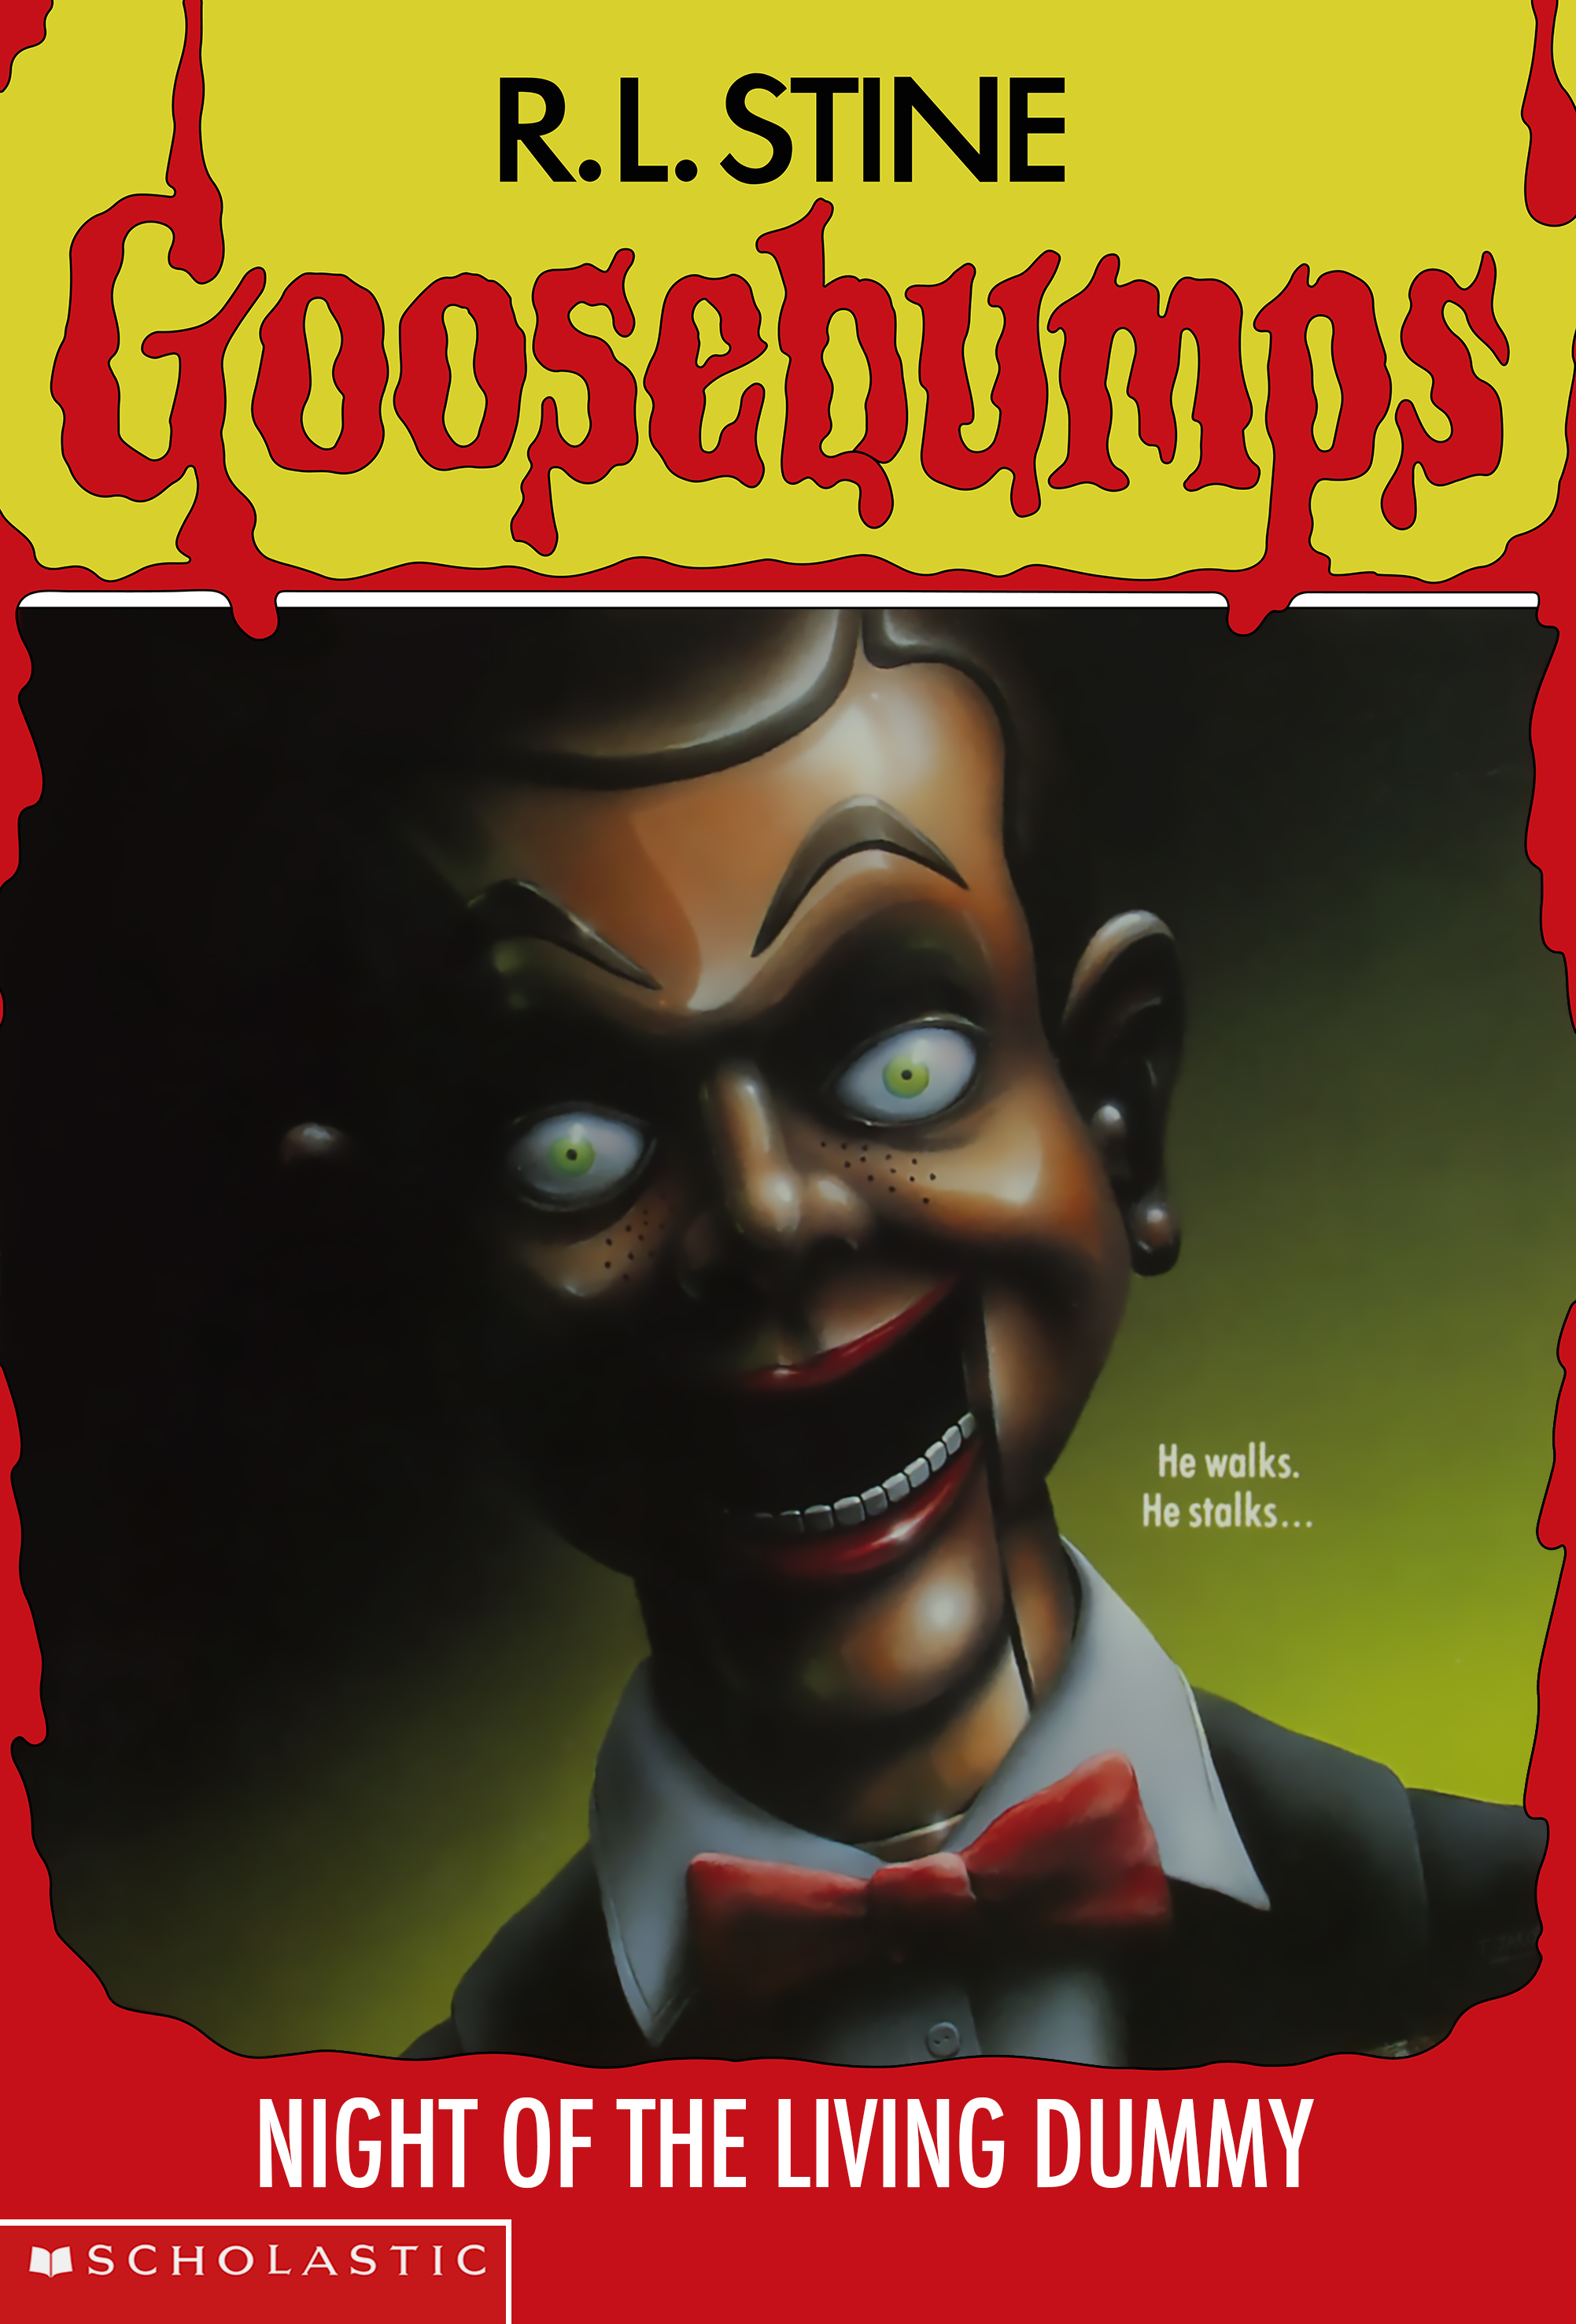 Scholastic, Sony to Produce New 'Goosebumps' TV Series - The Toy Book